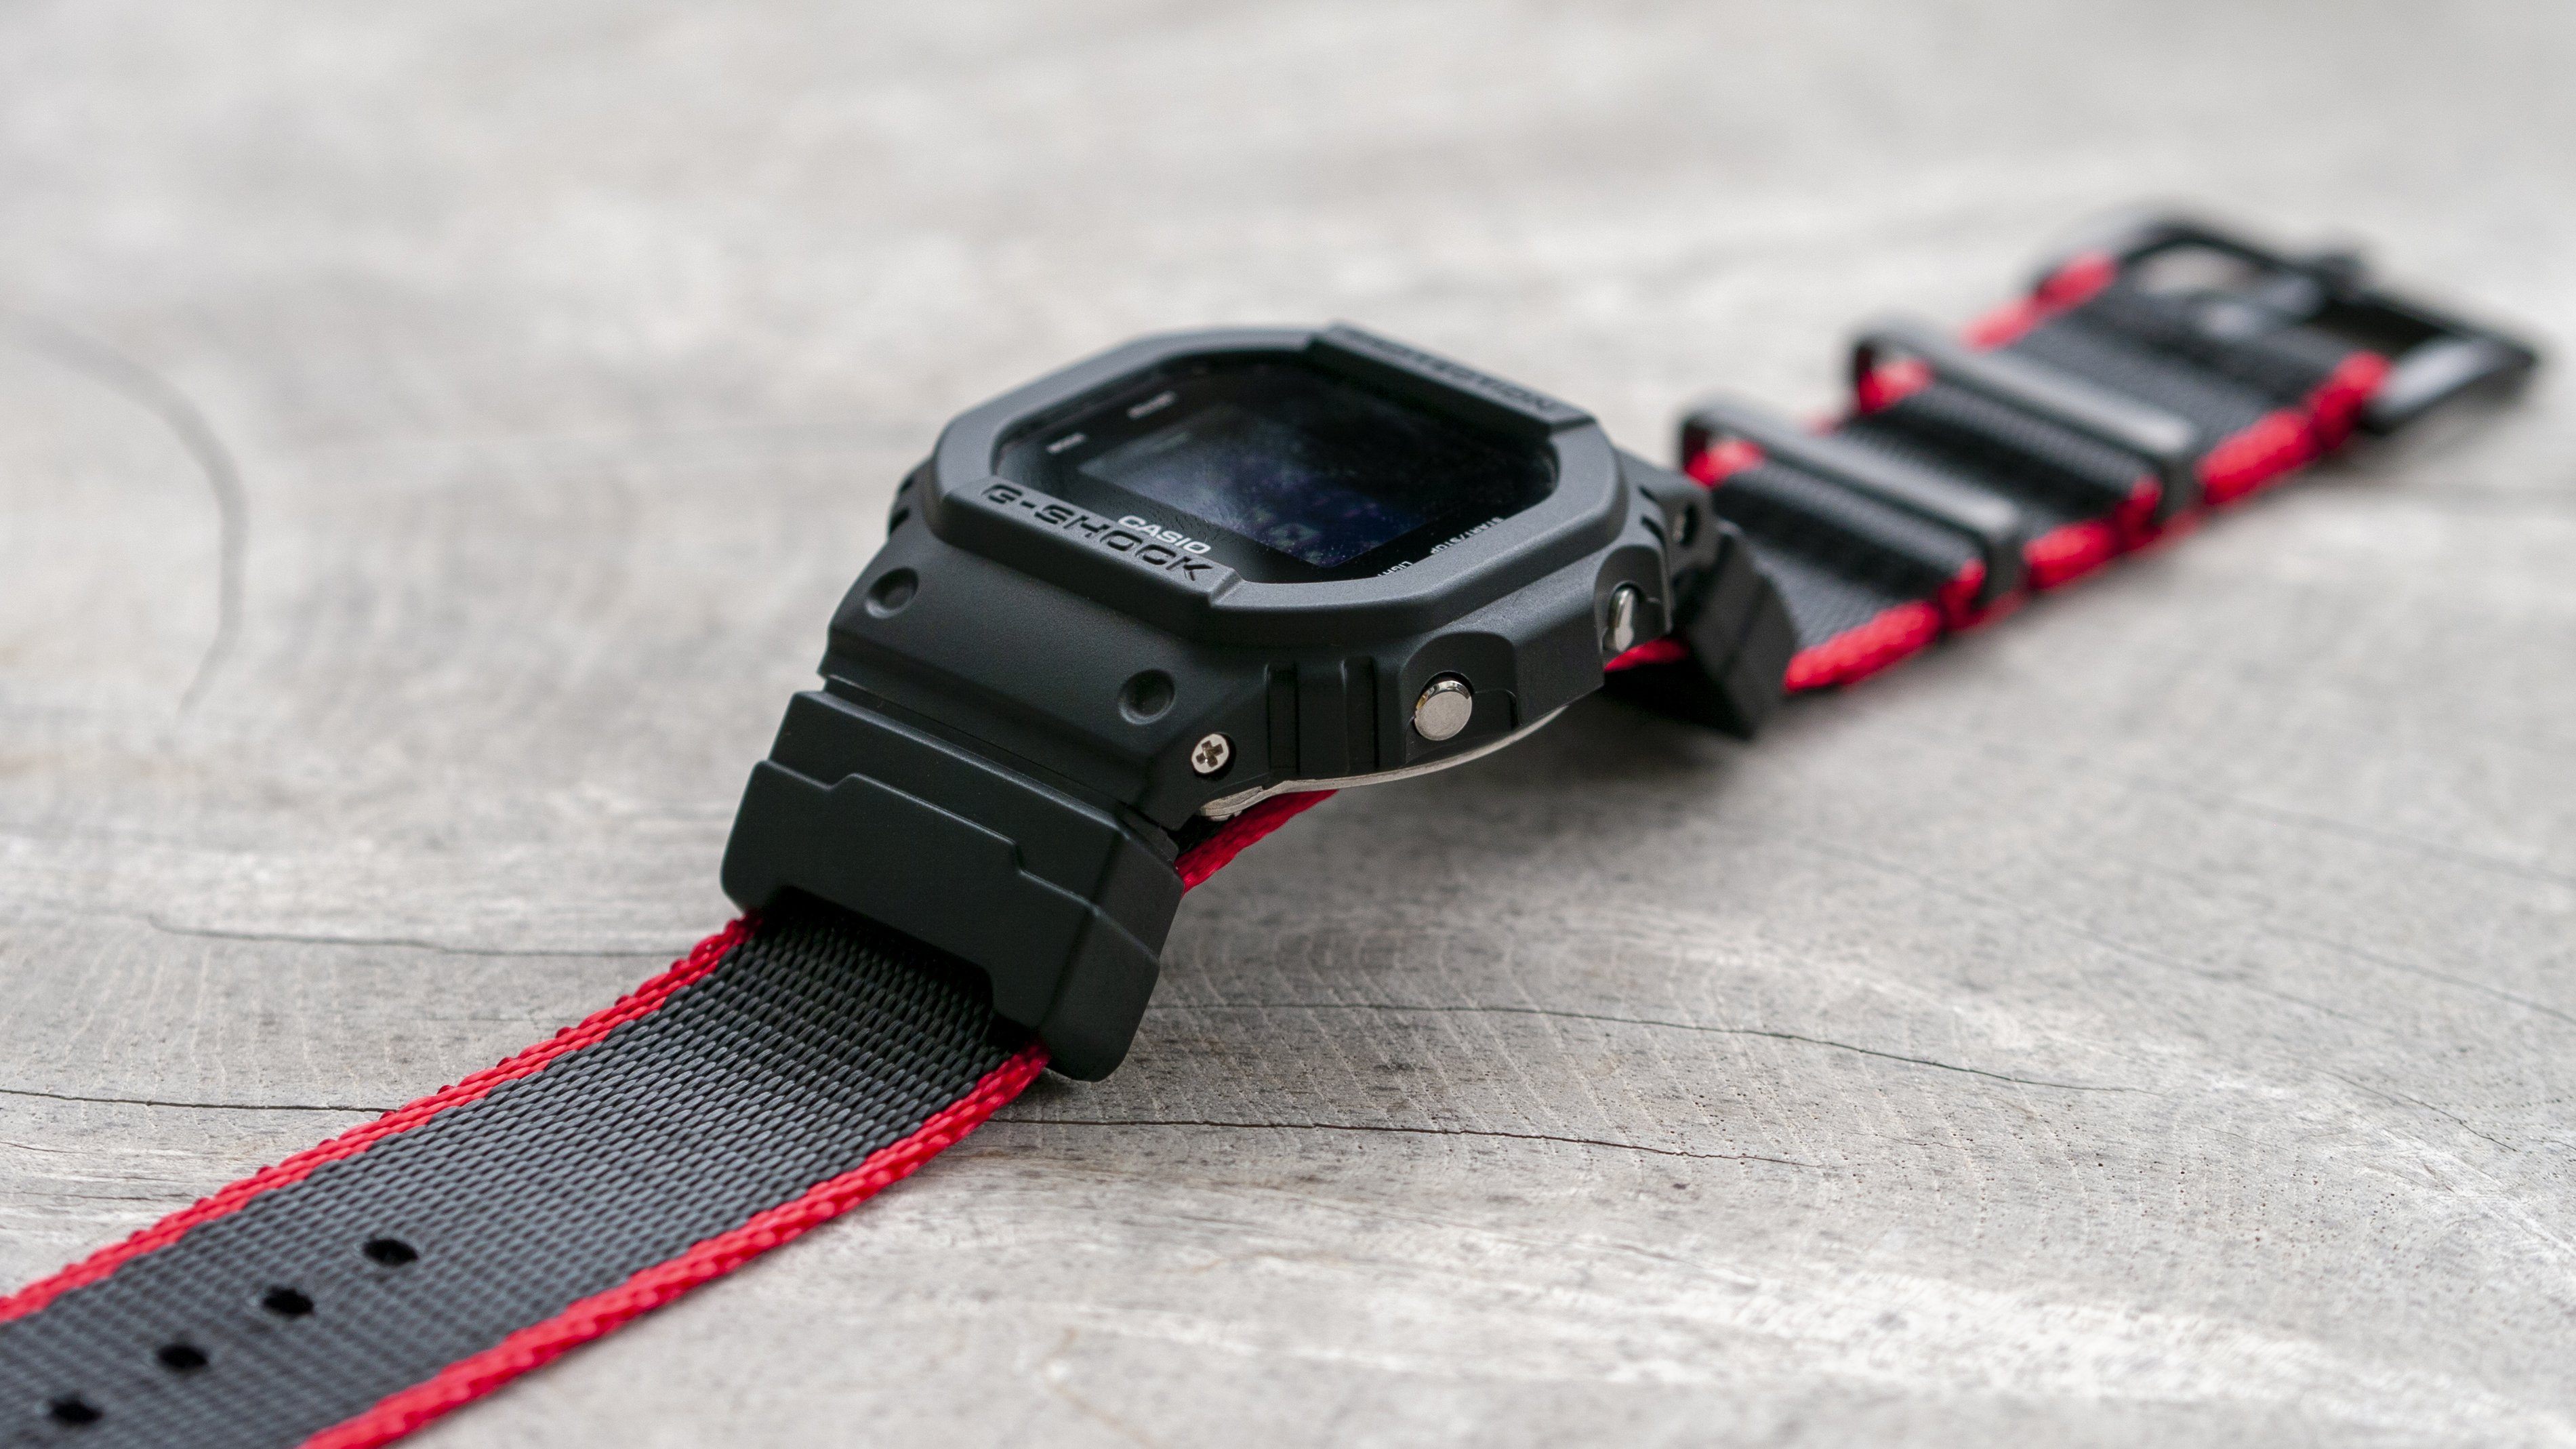 gshock dw5600 with seat belt adapter kit red and black